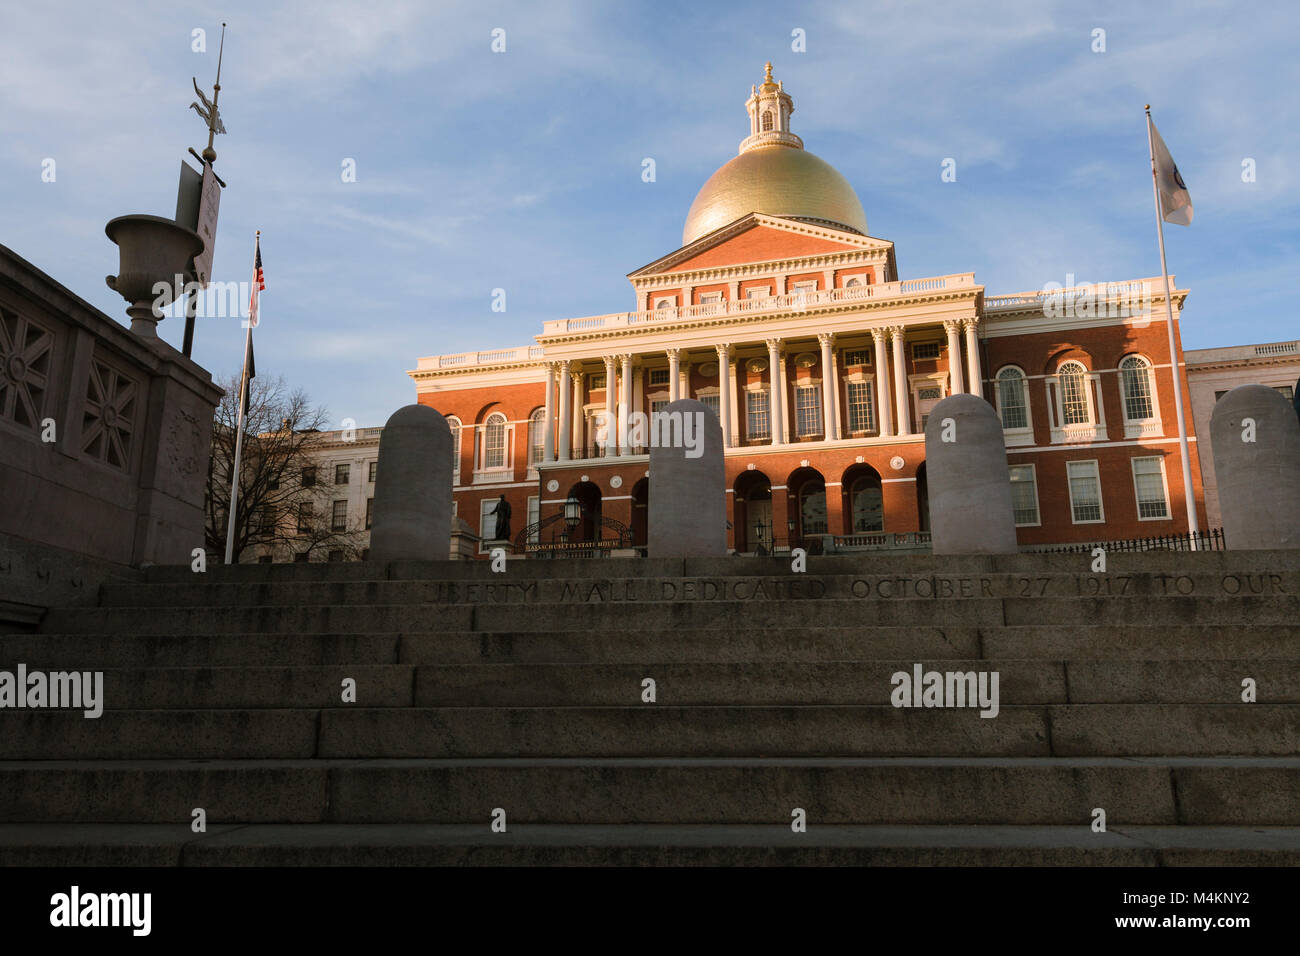 The Massachusetts State House or capitol building, Beacon Hill, Boston, USA, by Charles Bulfinch, 1795-98. Stock Photo